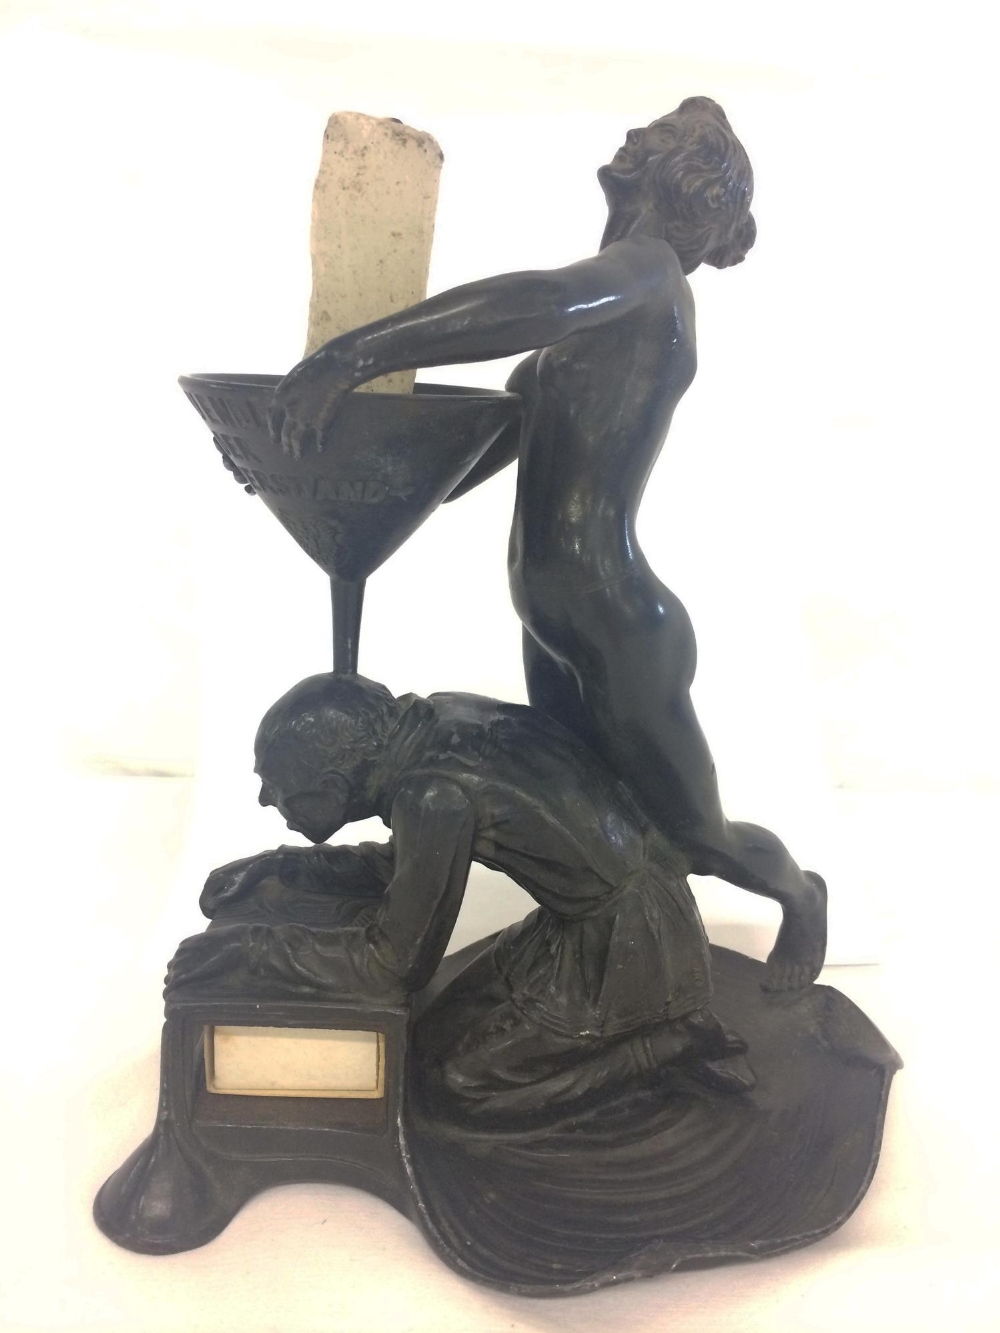 Early C20th German Spelter Candle/Match Holder modelled as gentleman kneeling on lily pad over a - Image 2 of 3